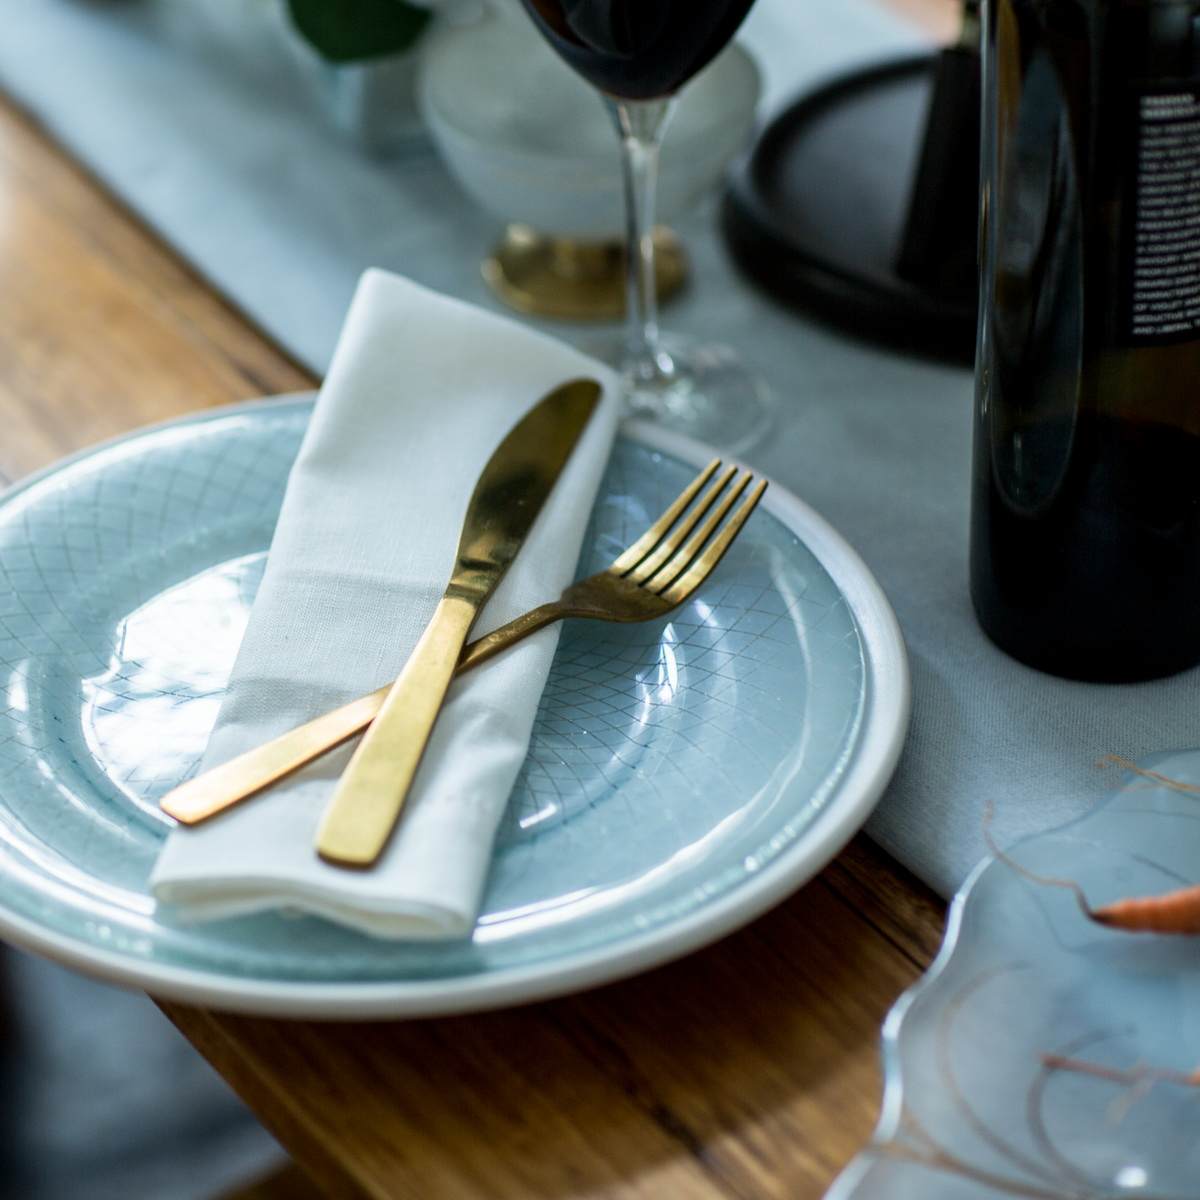 ight blue dinner plate with gold knife and fork on a table with a blue table runner